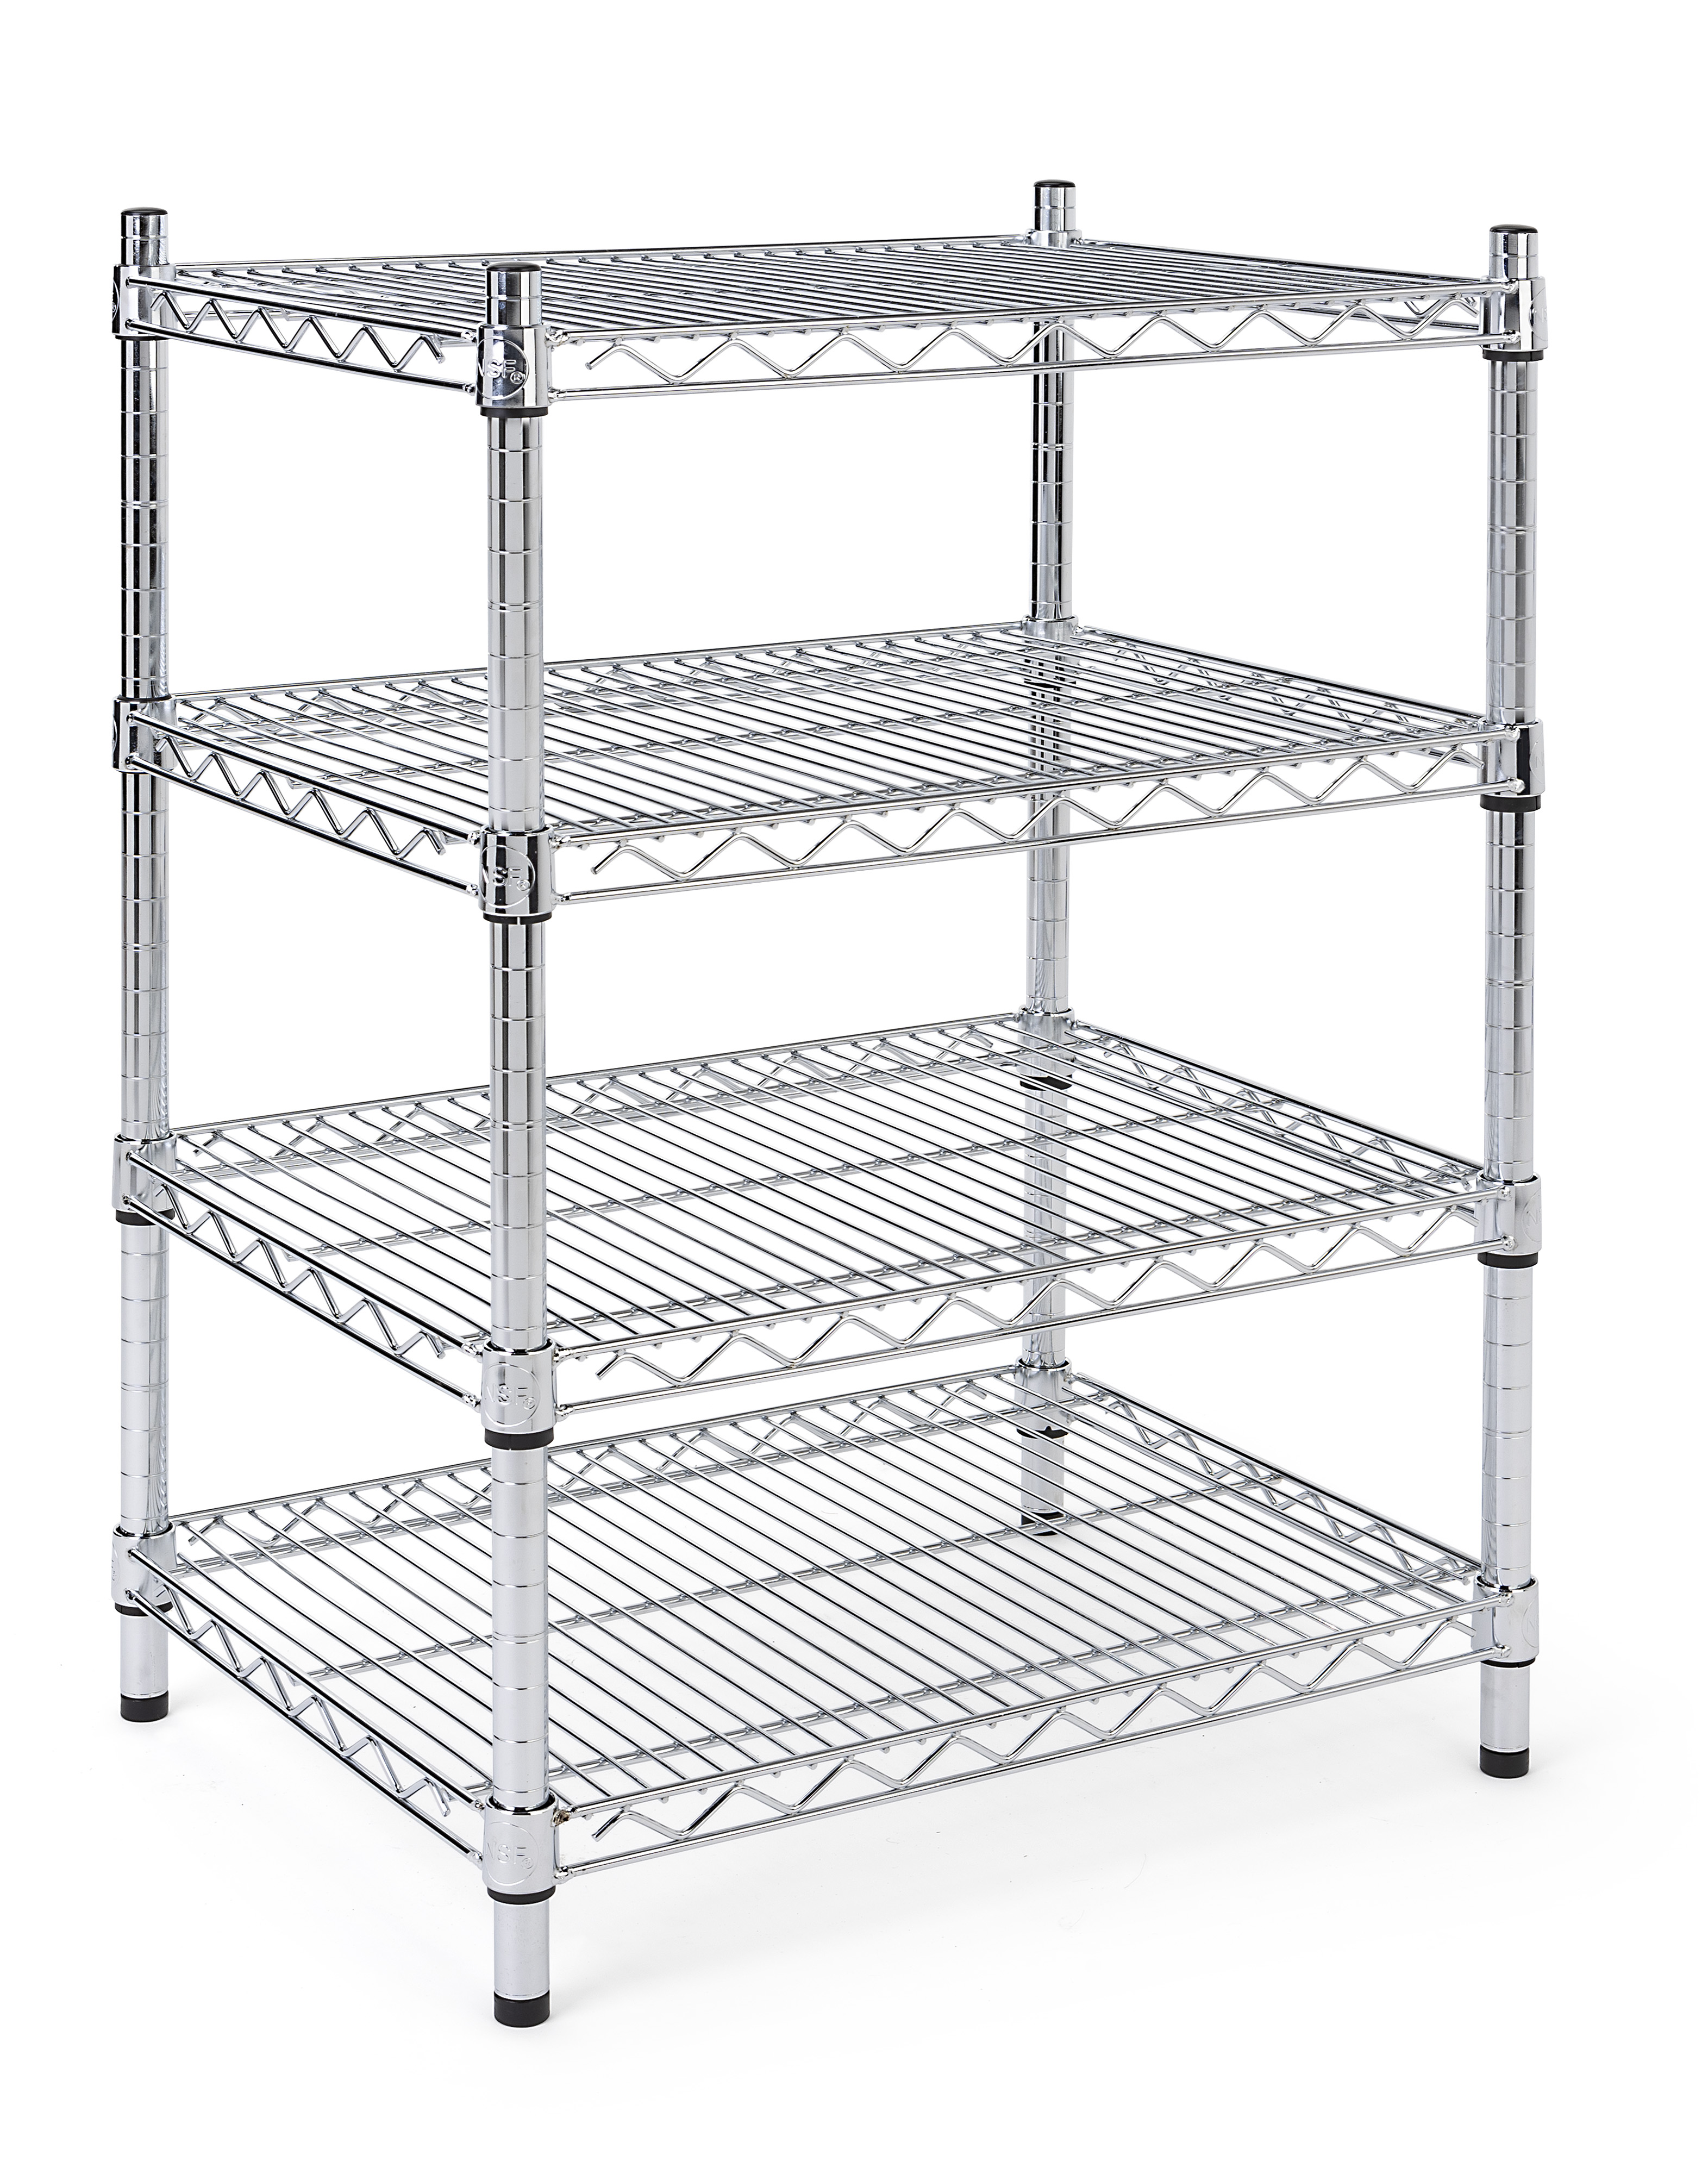 WIRE SHELVING